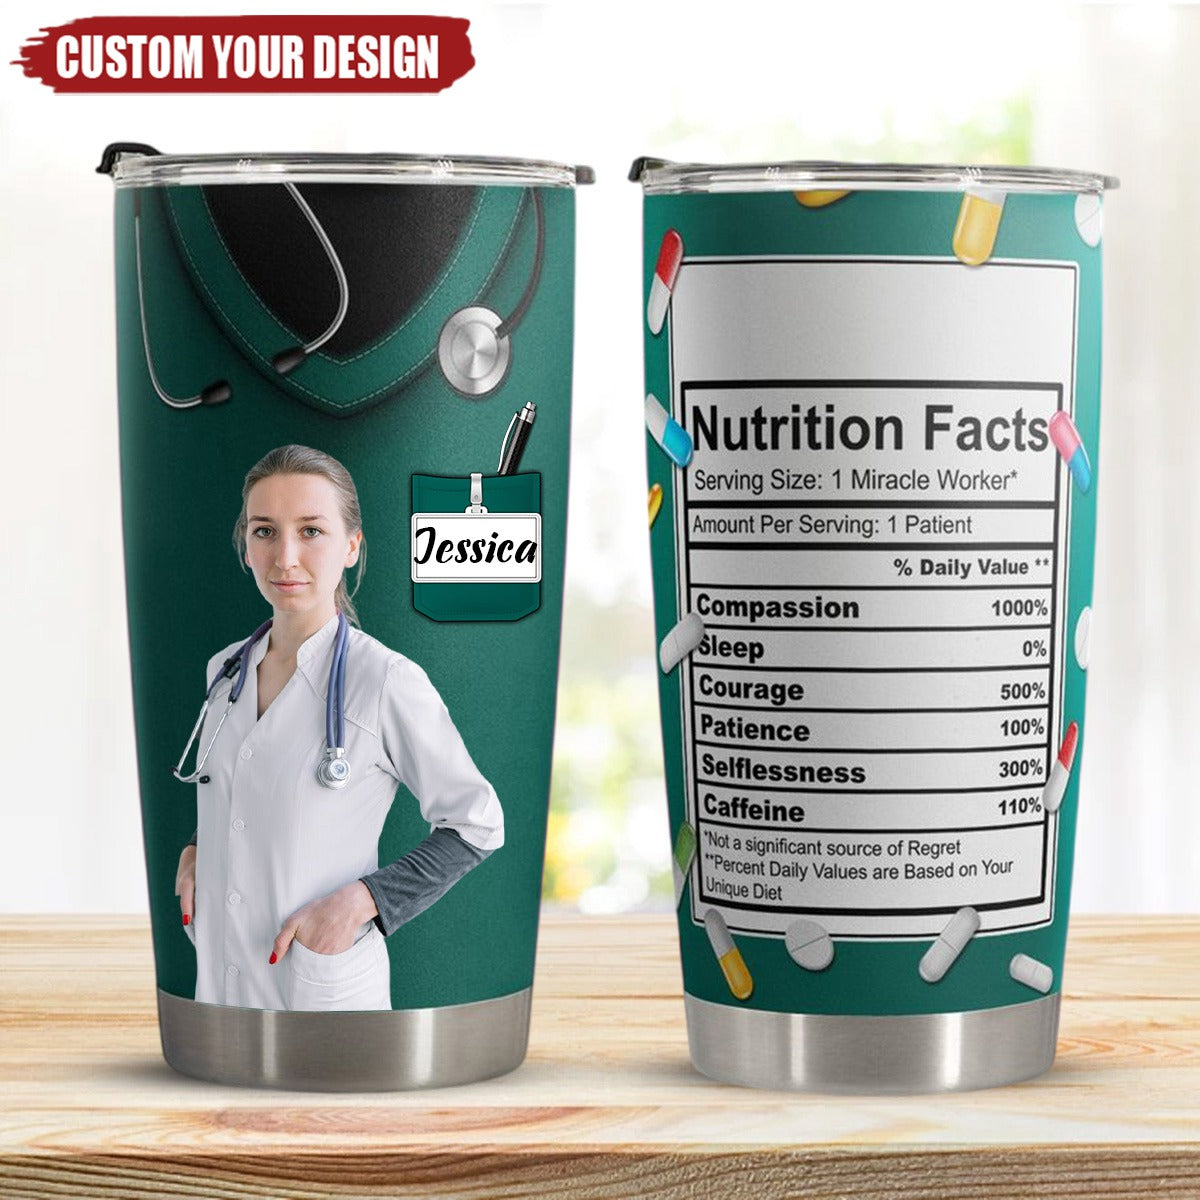 Nurse Nutrition Facts - Personalized Photo Tumbler Cup